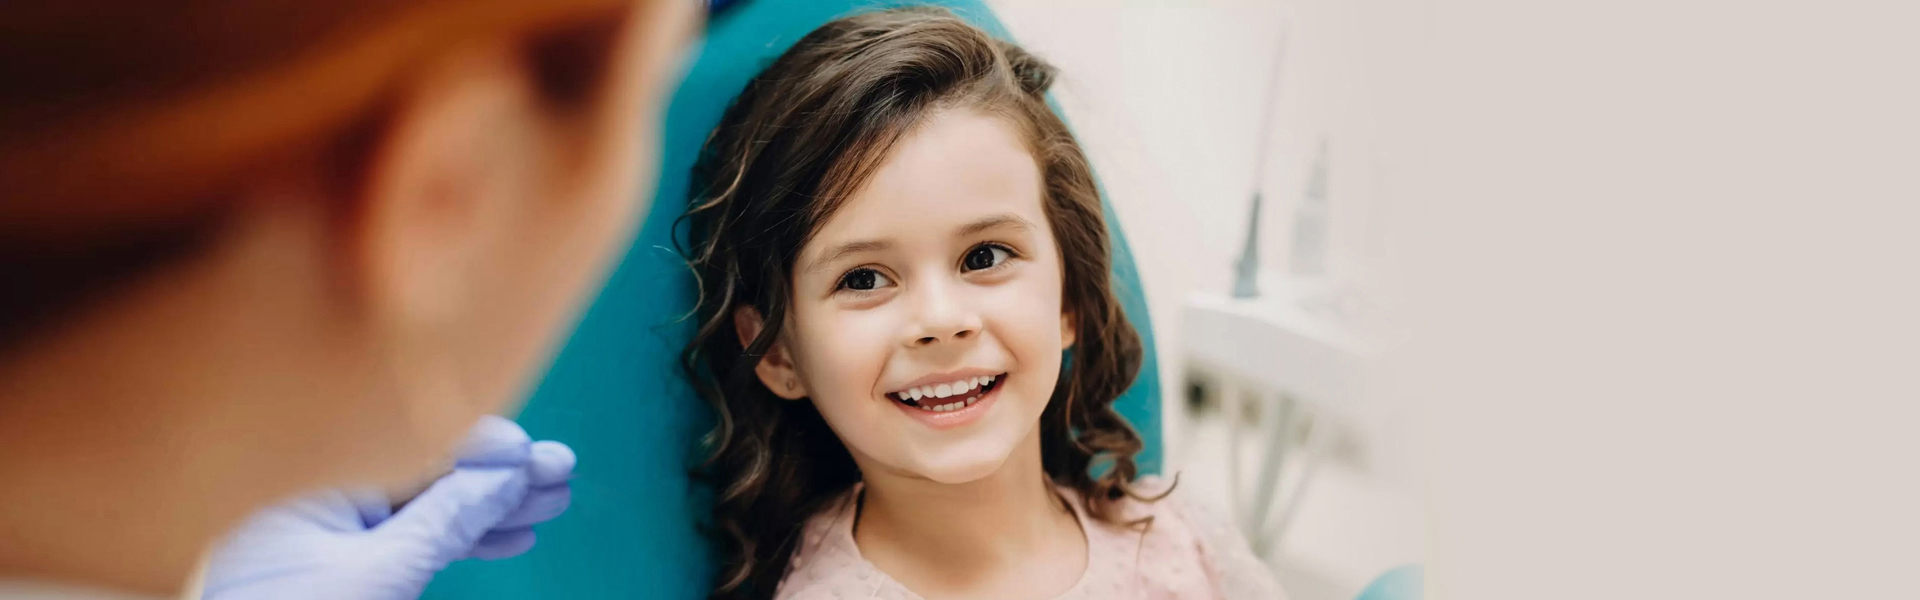 7 Frequently Asked Questions About Pediatric Dentistry